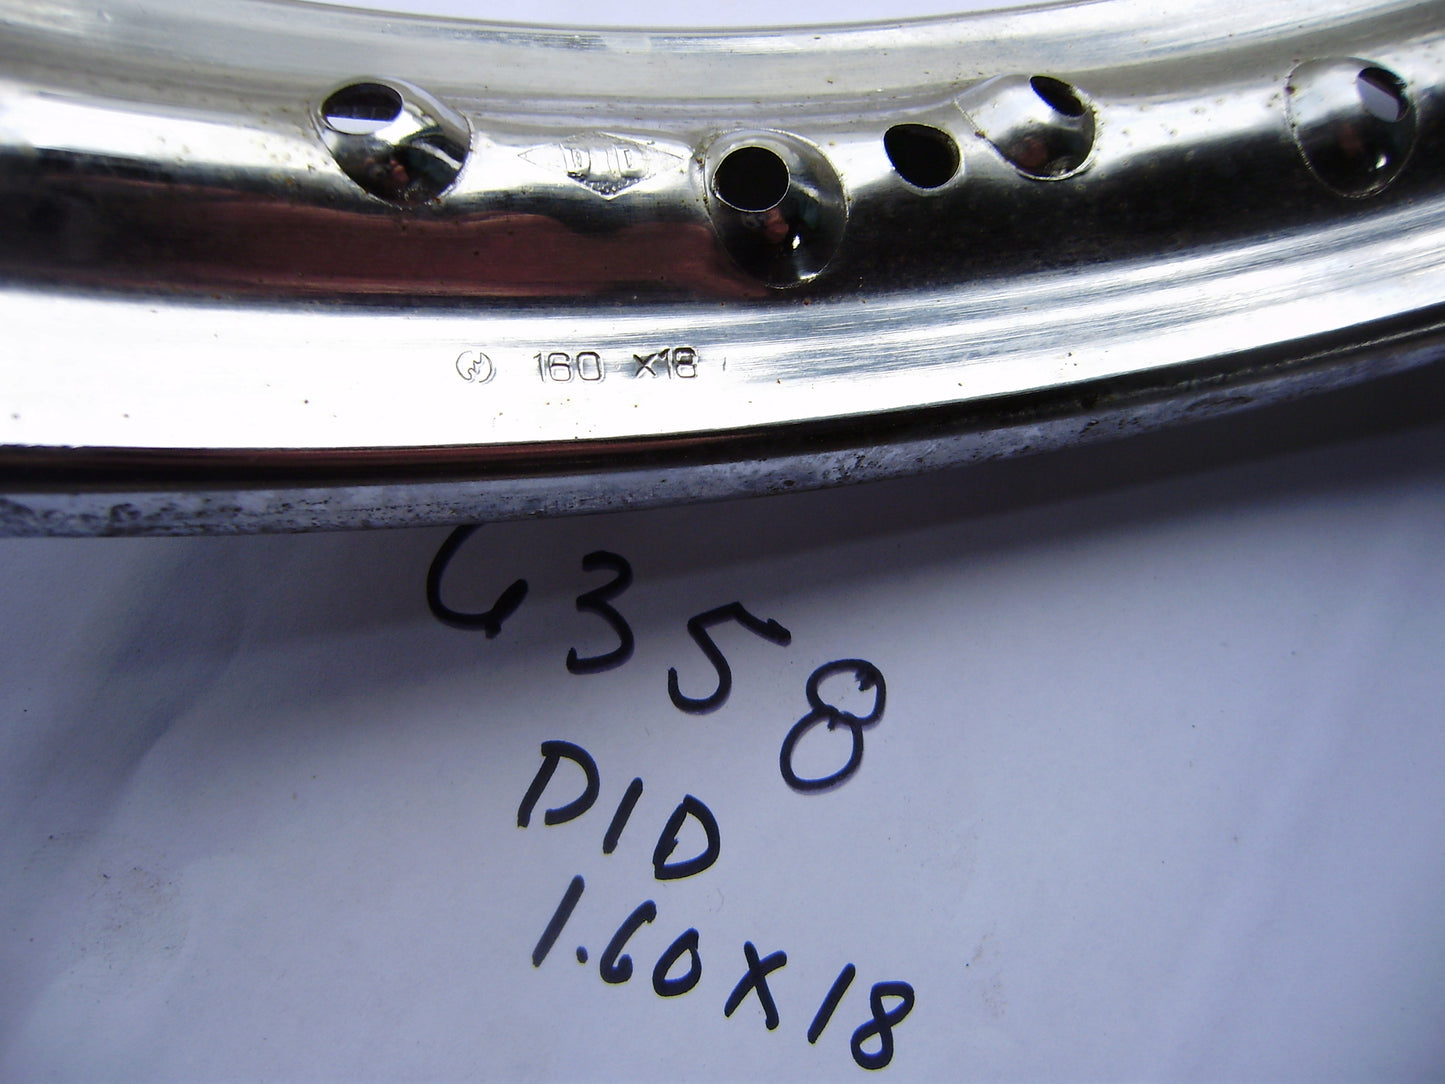 Honda OEM NOS18" Rim Fit CB CL175 and others  44701-235-003 my sku 6358